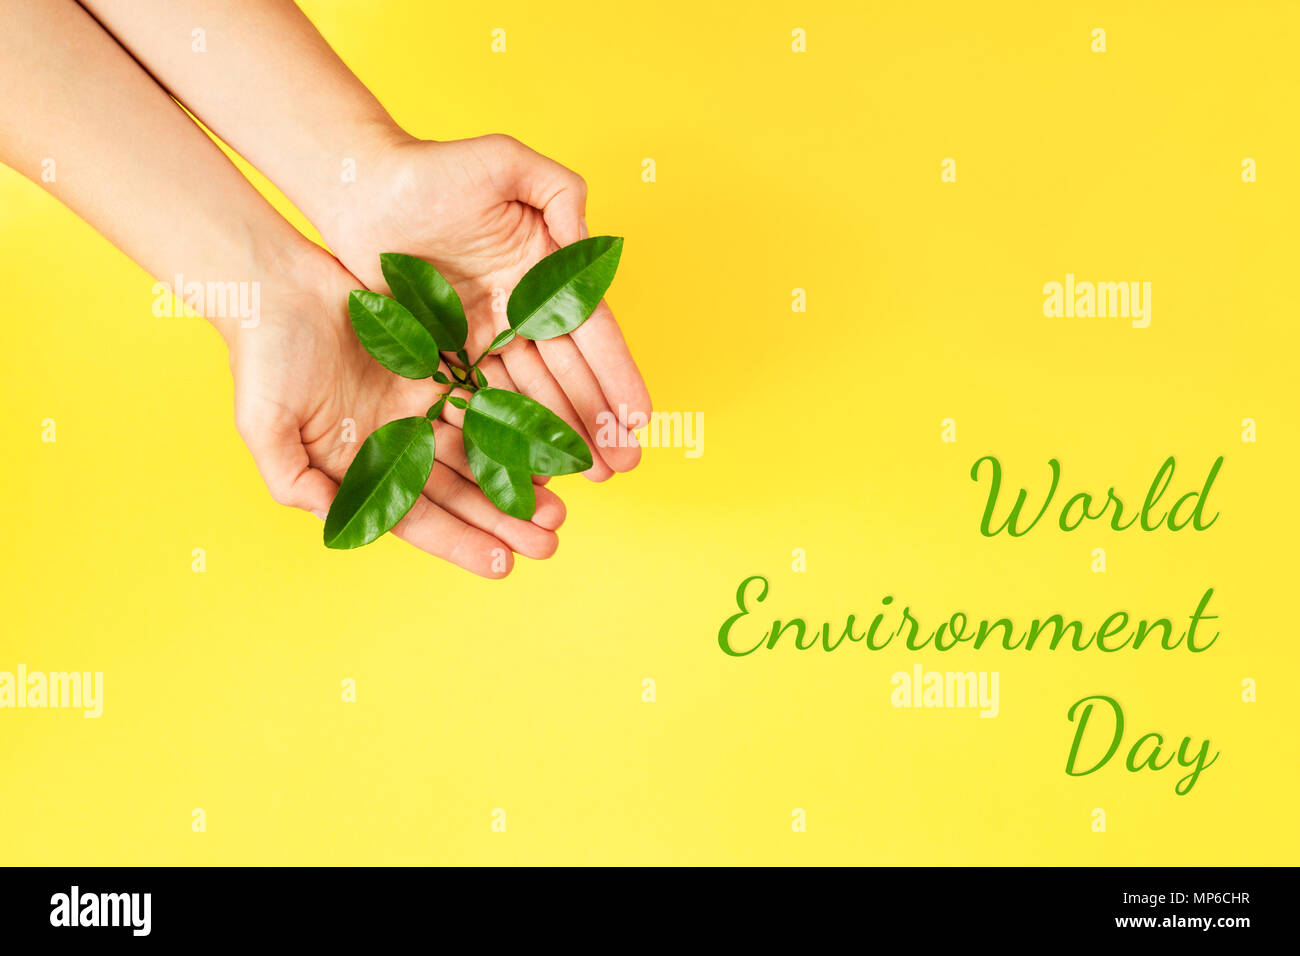 World Environment Day card. Female hands holding green plant on yellow background. Ecology concept. Place for text. Stock Photo